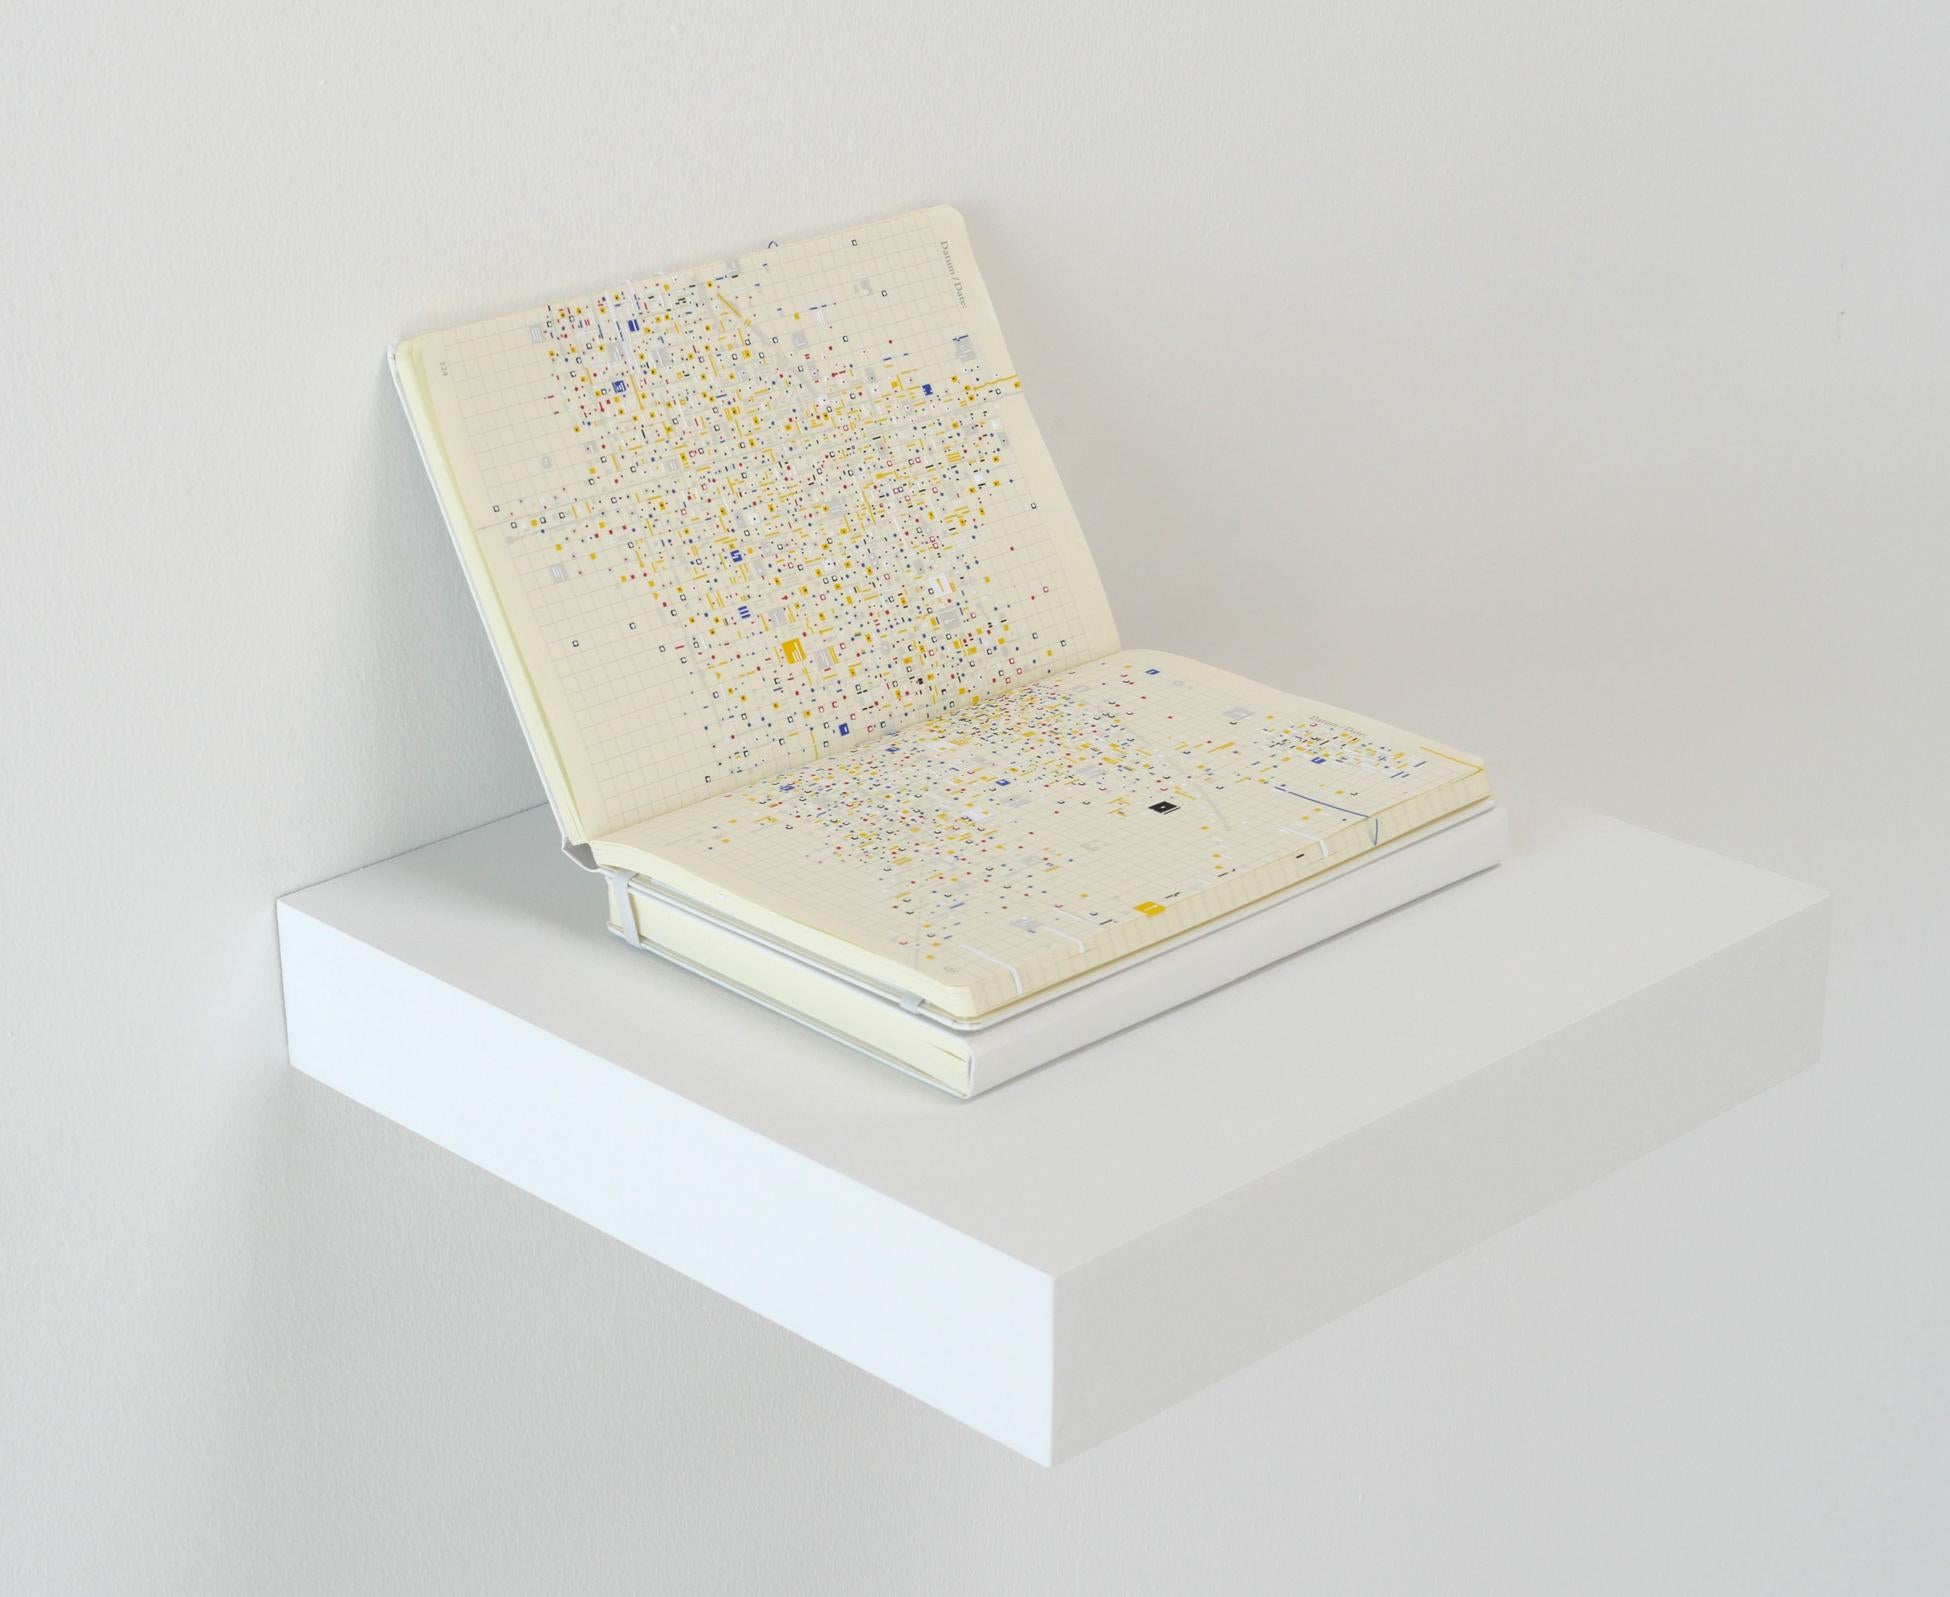 Marco Maggi Abstract Sculpture - Notebook